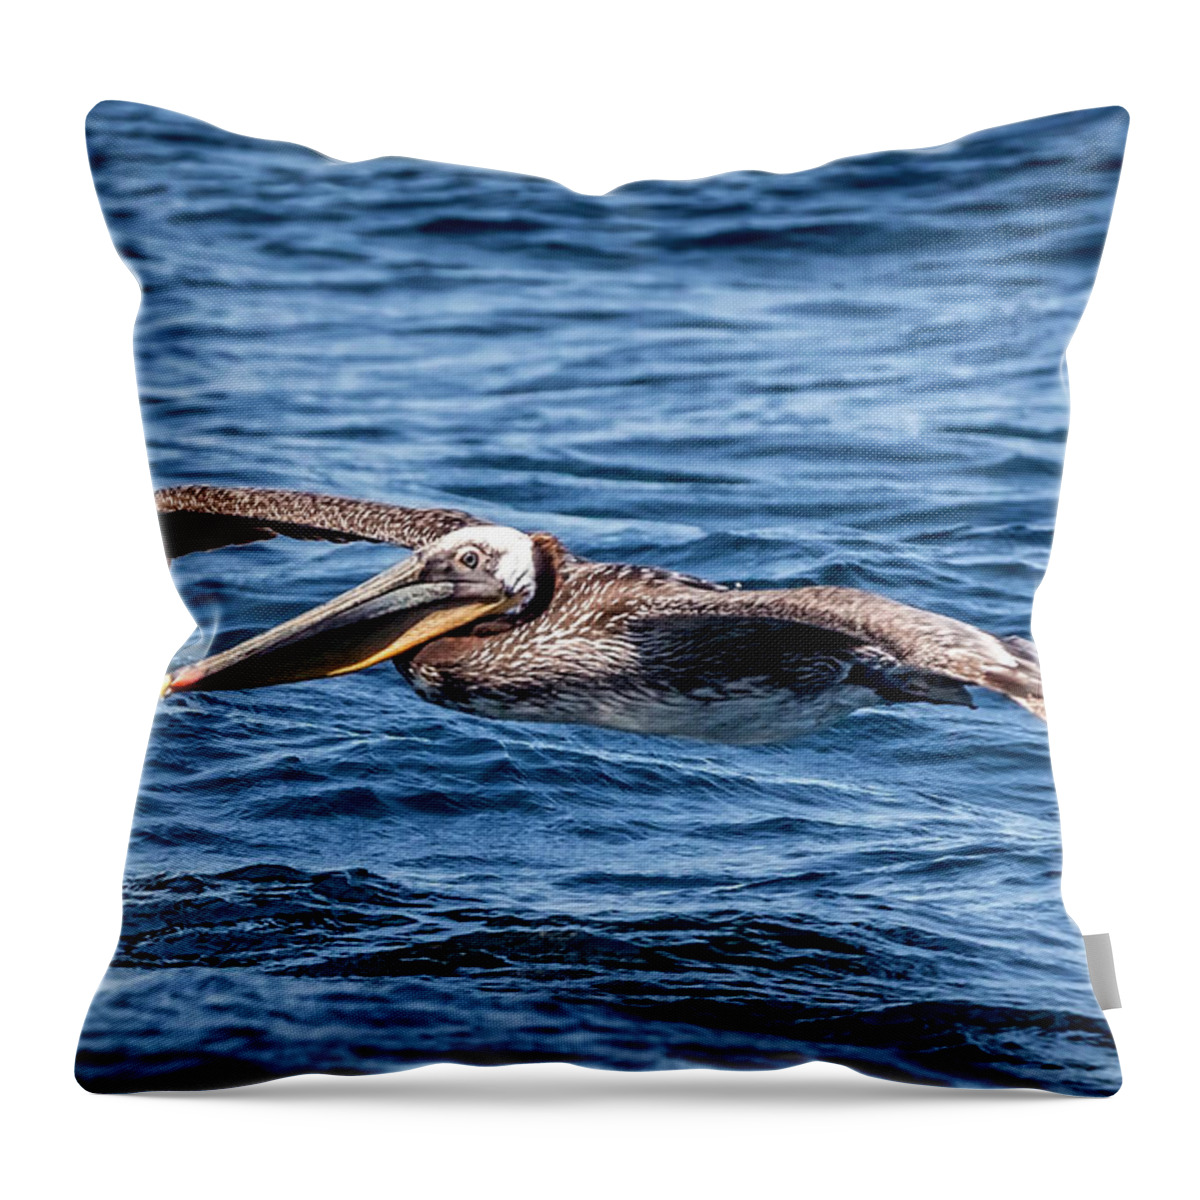 Brown Pelican Throw Pillow featuring the photograph Brown Pelican 4 #1 by Endre Balogh